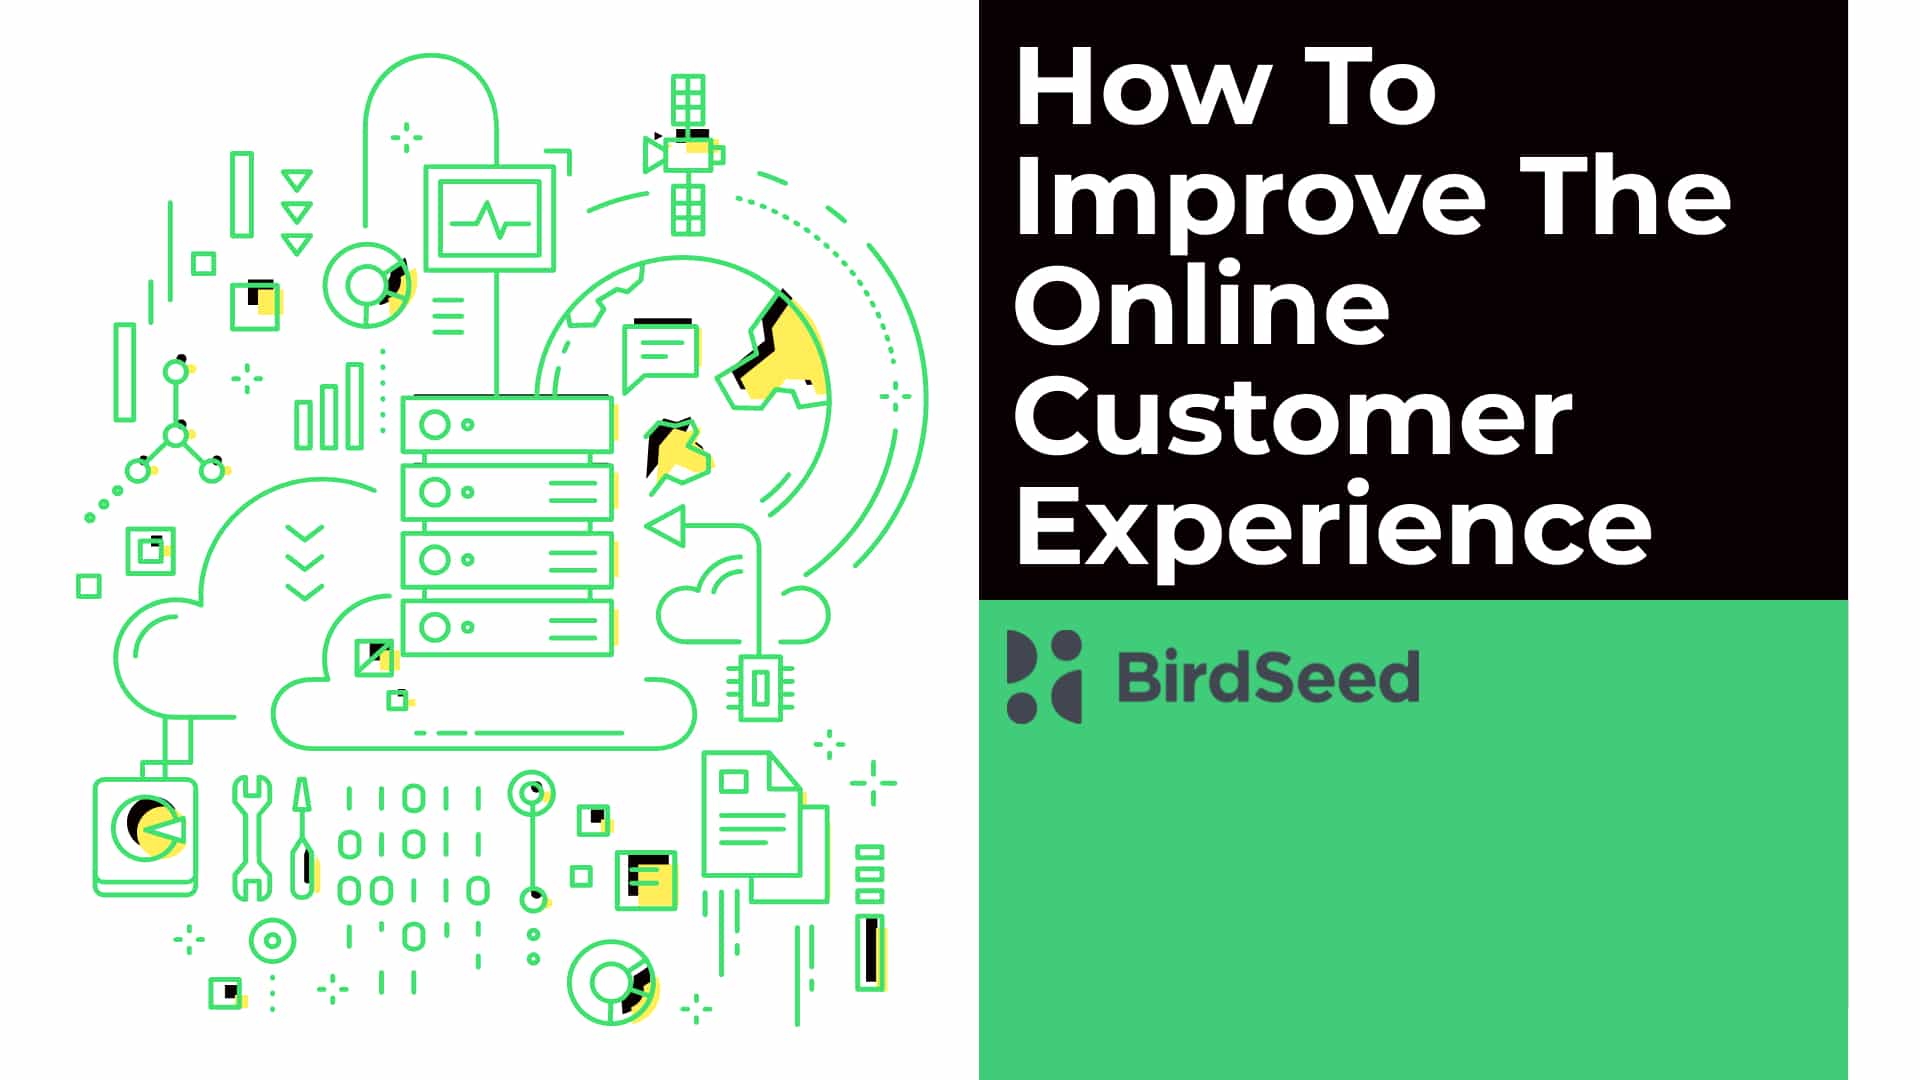 How To Improve the Customer Experience